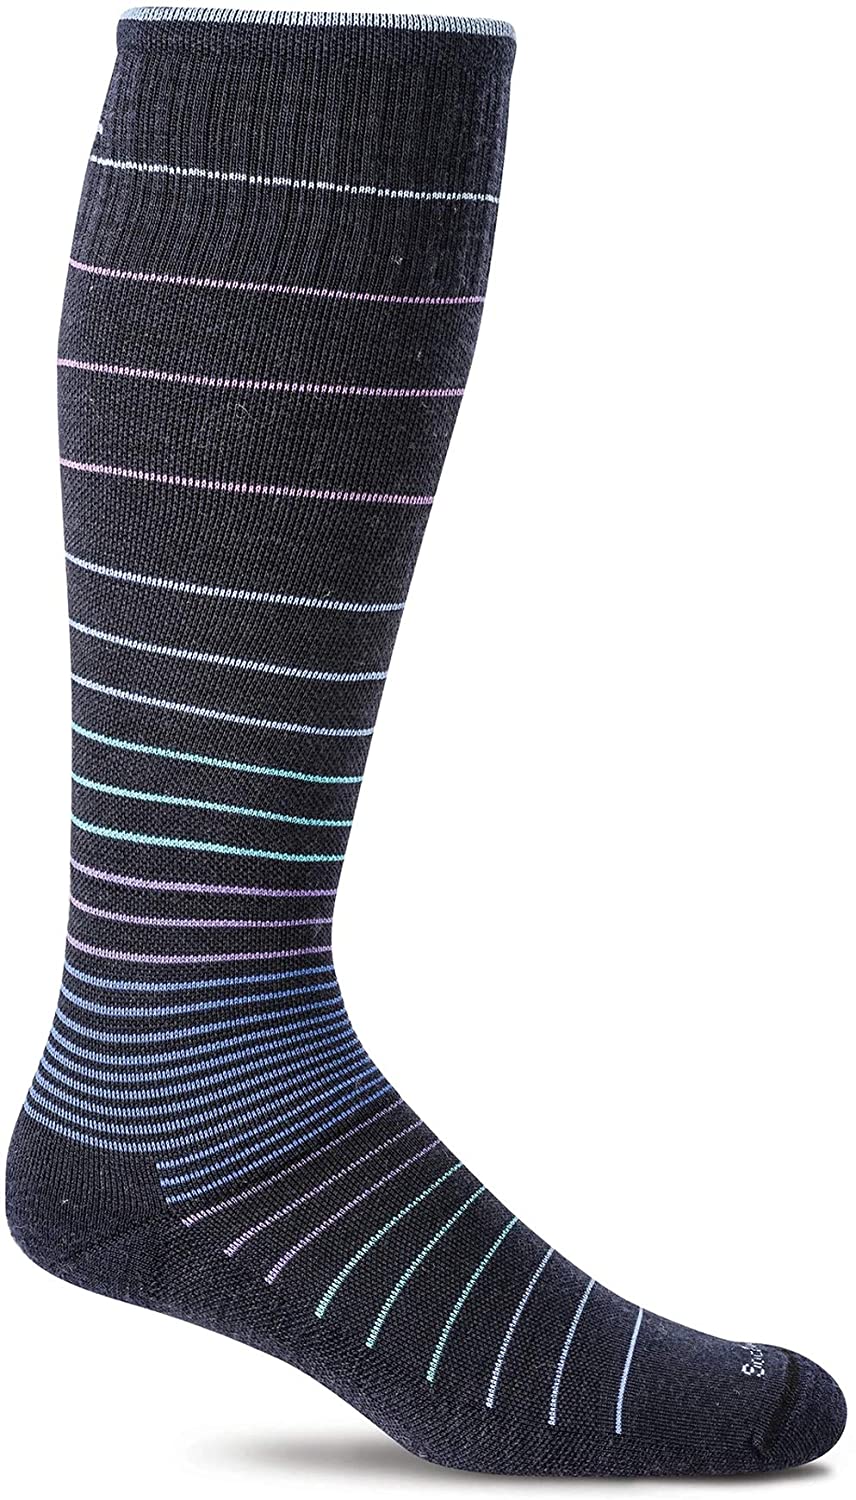 Sockwell Women's Circulator Moderate Graduated Compression Sock in Navy from the side